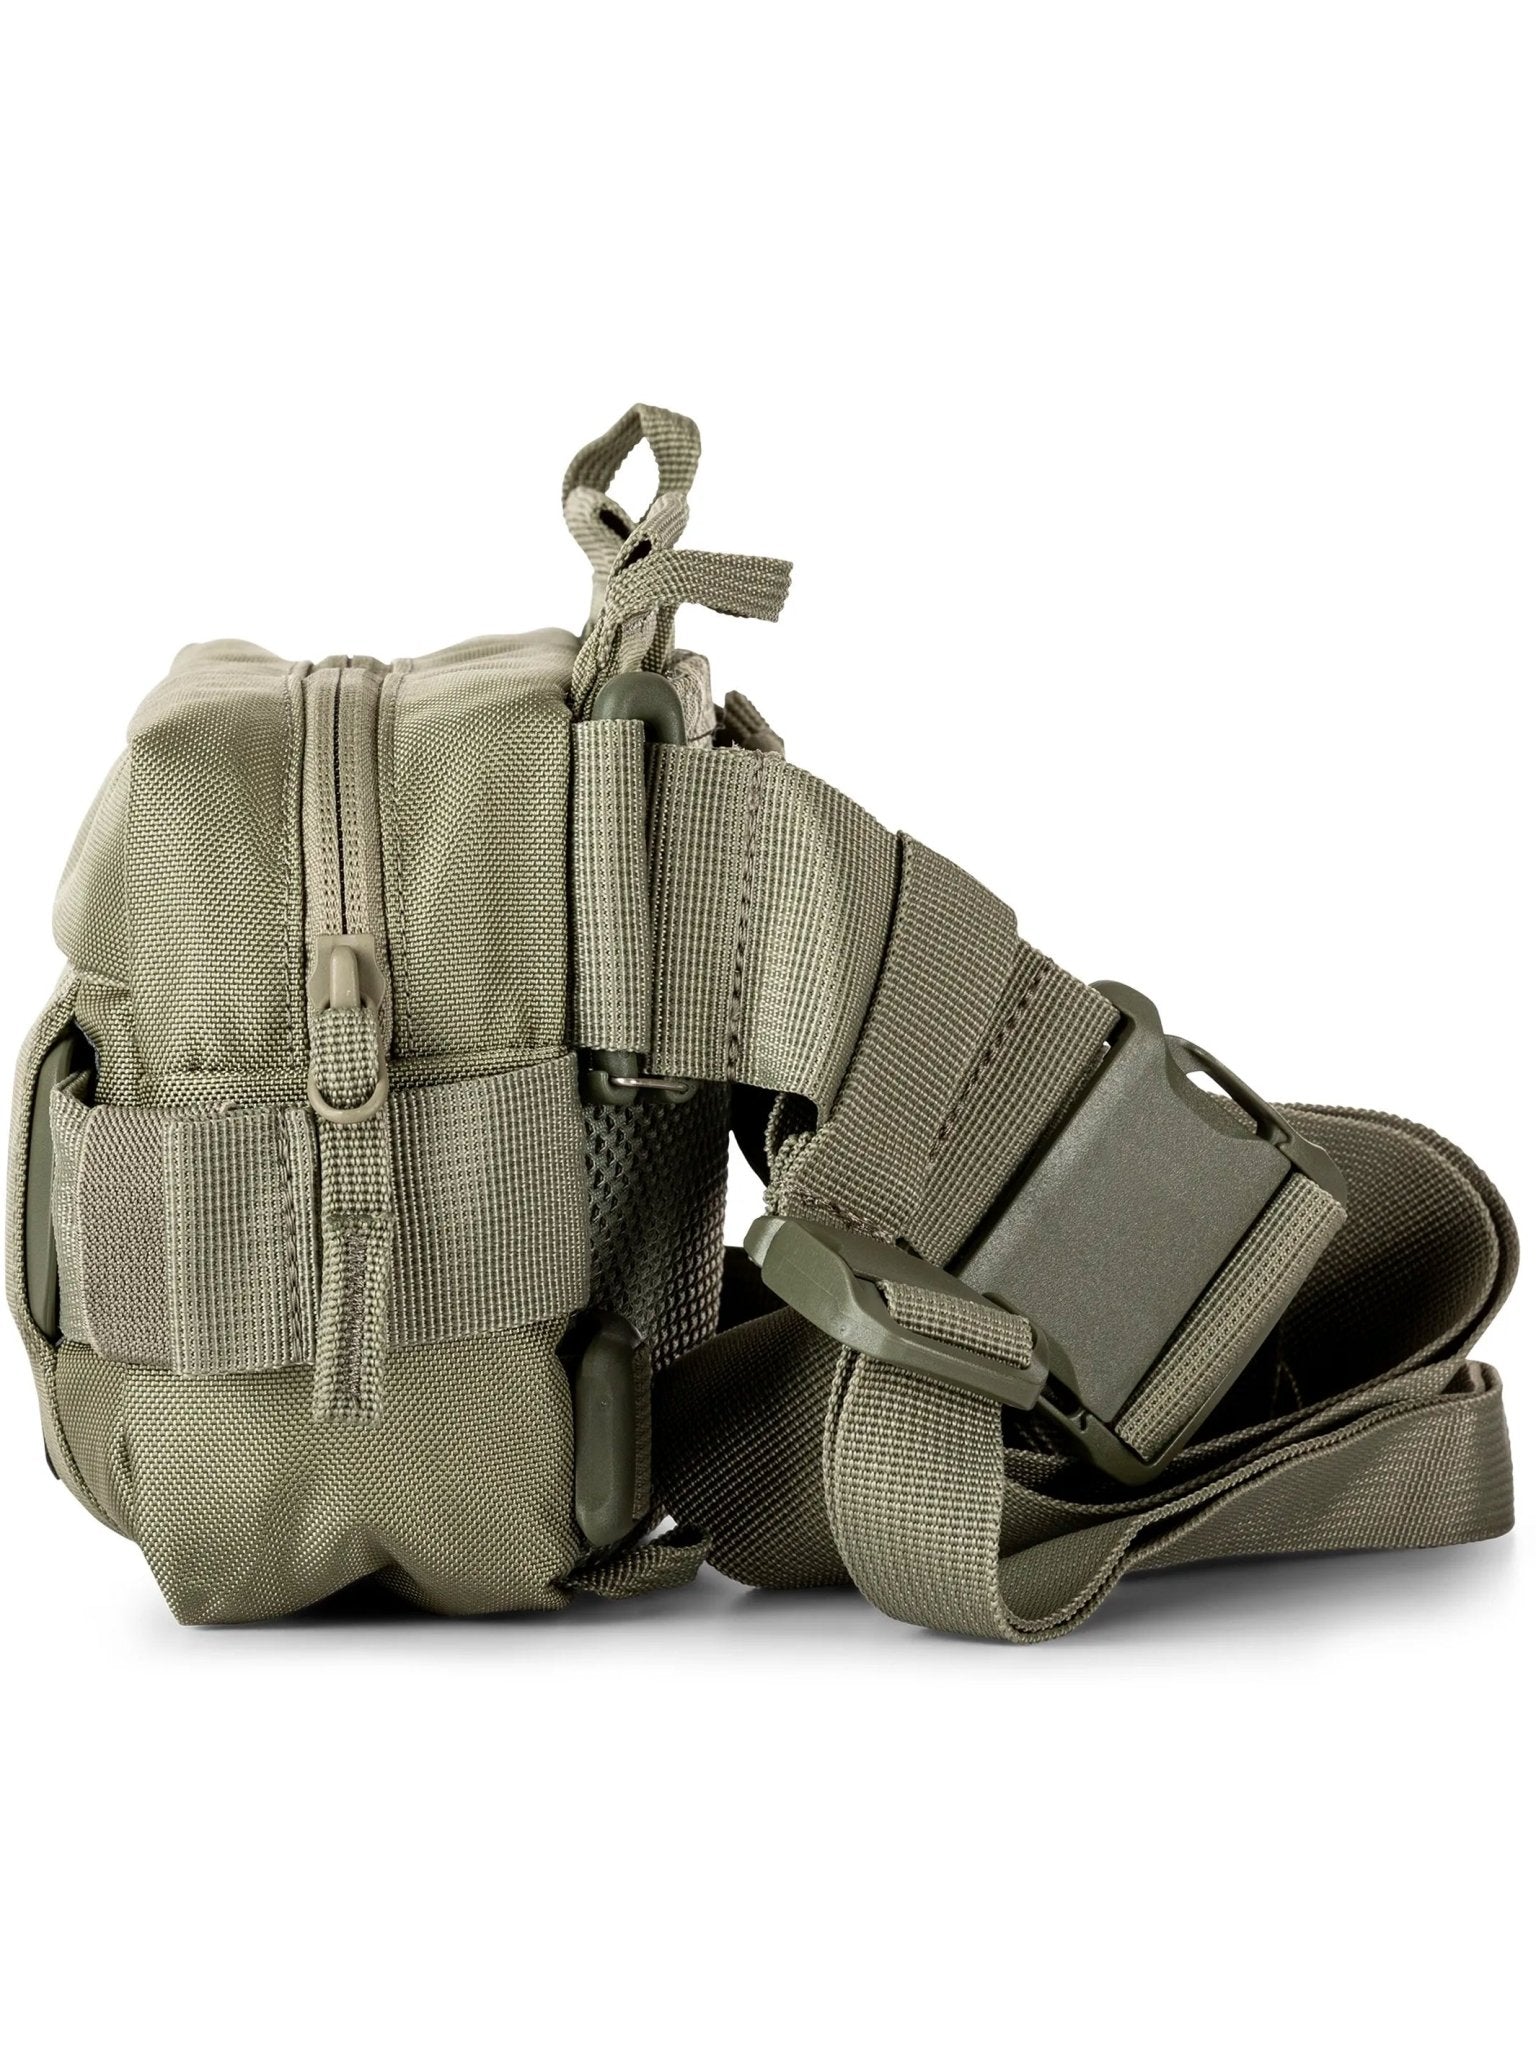 4elementsclothing5.11 Tactical5.11 Tactical - 5.11 Tactical LV6 WAIST PACK 2.0 3L - Style 56702Bag56702-042